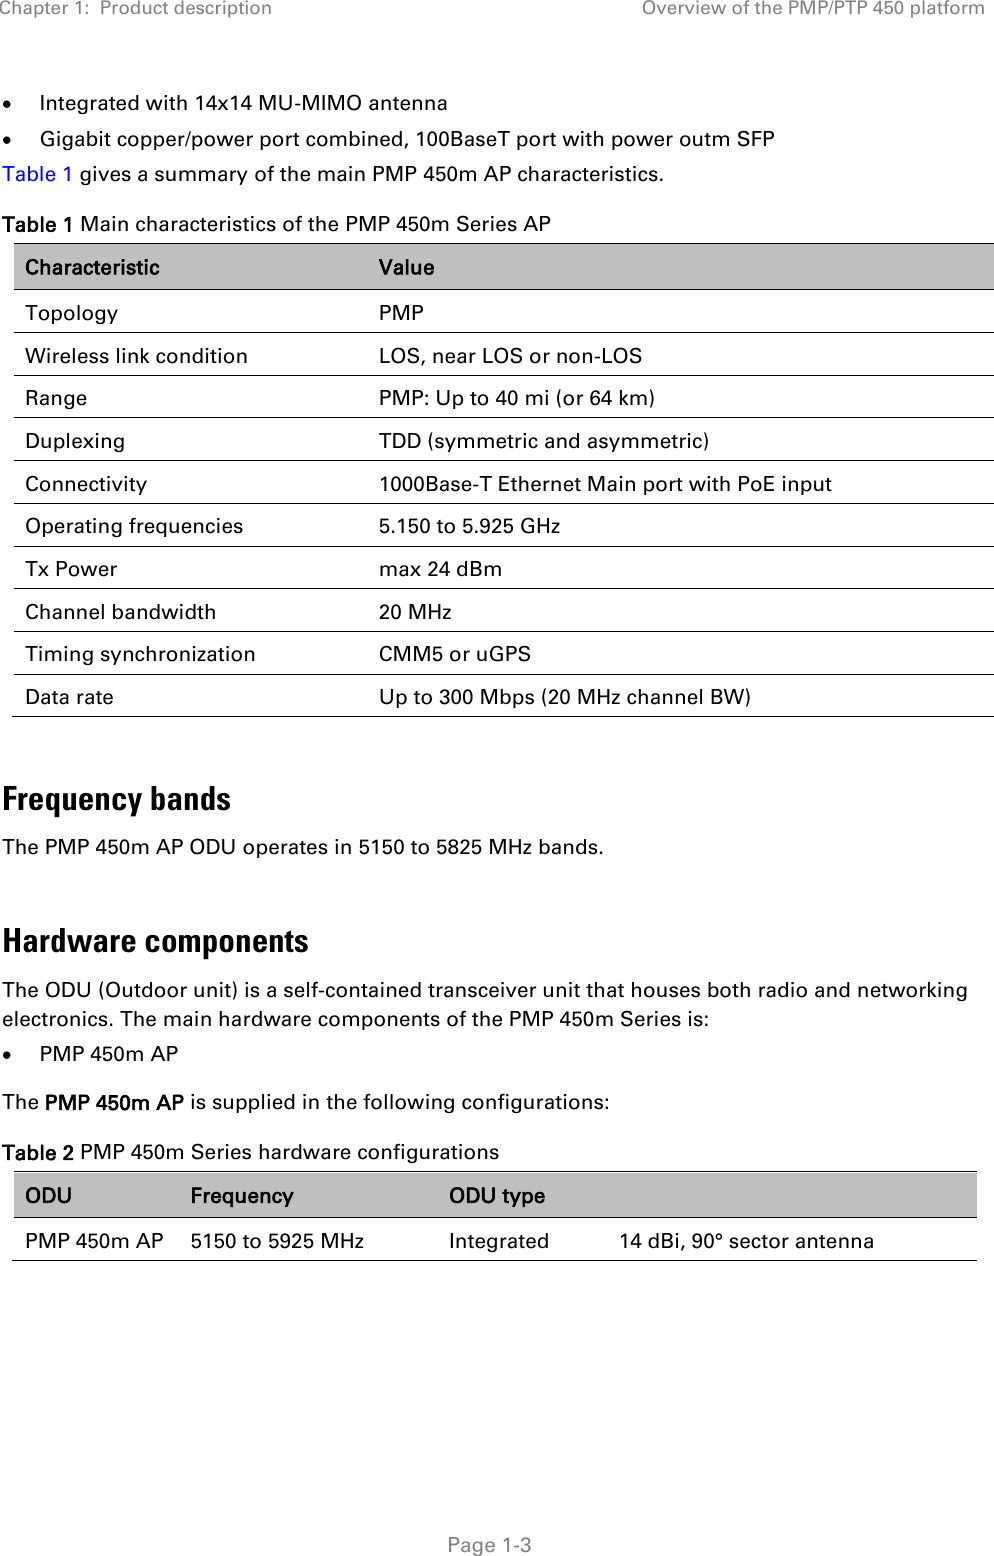 Chapter 1:  Product description Overview of the PMP/PTP 450 platform   Page 1-3  Integrated with 14x14 MU-MIMO antenna  Gigabit copper/power port combined, 100BaseT port with power outm SFP Table 1 gives a summary of the main PMP 450m AP characteristics. Table 1 Main characteristics of the PMP 450m Series AP Characteristic Value Topology PMP Wireless link condition LOS, near LOS or non-LOS Range PMP: Up to 40 mi (or 64 km) Duplexing TDD (symmetric and asymmetric) Connectivity 1000Base-T Ethernet Main port with PoE input Operating frequencies 5.150 to 5.925 GHz Tx Power max 24 dBm Channel bandwidth 20 MHz Timing synchronization CMM5 or uGPS Data rate Up to 300 Mbps (20 MHz channel BW)  Frequency bands The PMP 450m AP ODU operates in 5150 to 5825 MHz bands.  Hardware components The ODU (Outdoor unit) is a self-contained transceiver unit that houses both radio and networking electronics. The main hardware components of the PMP 450m Series is:  PMP 450m AP The PMP 450m AP is supplied in the following configurations: Table 2 PMP 450m Series hardware configurations ODU Frequency ODU type  PMP 450m AP 5150 to 5925 MHz Integrated 14 dBi, 90° sector antenna   